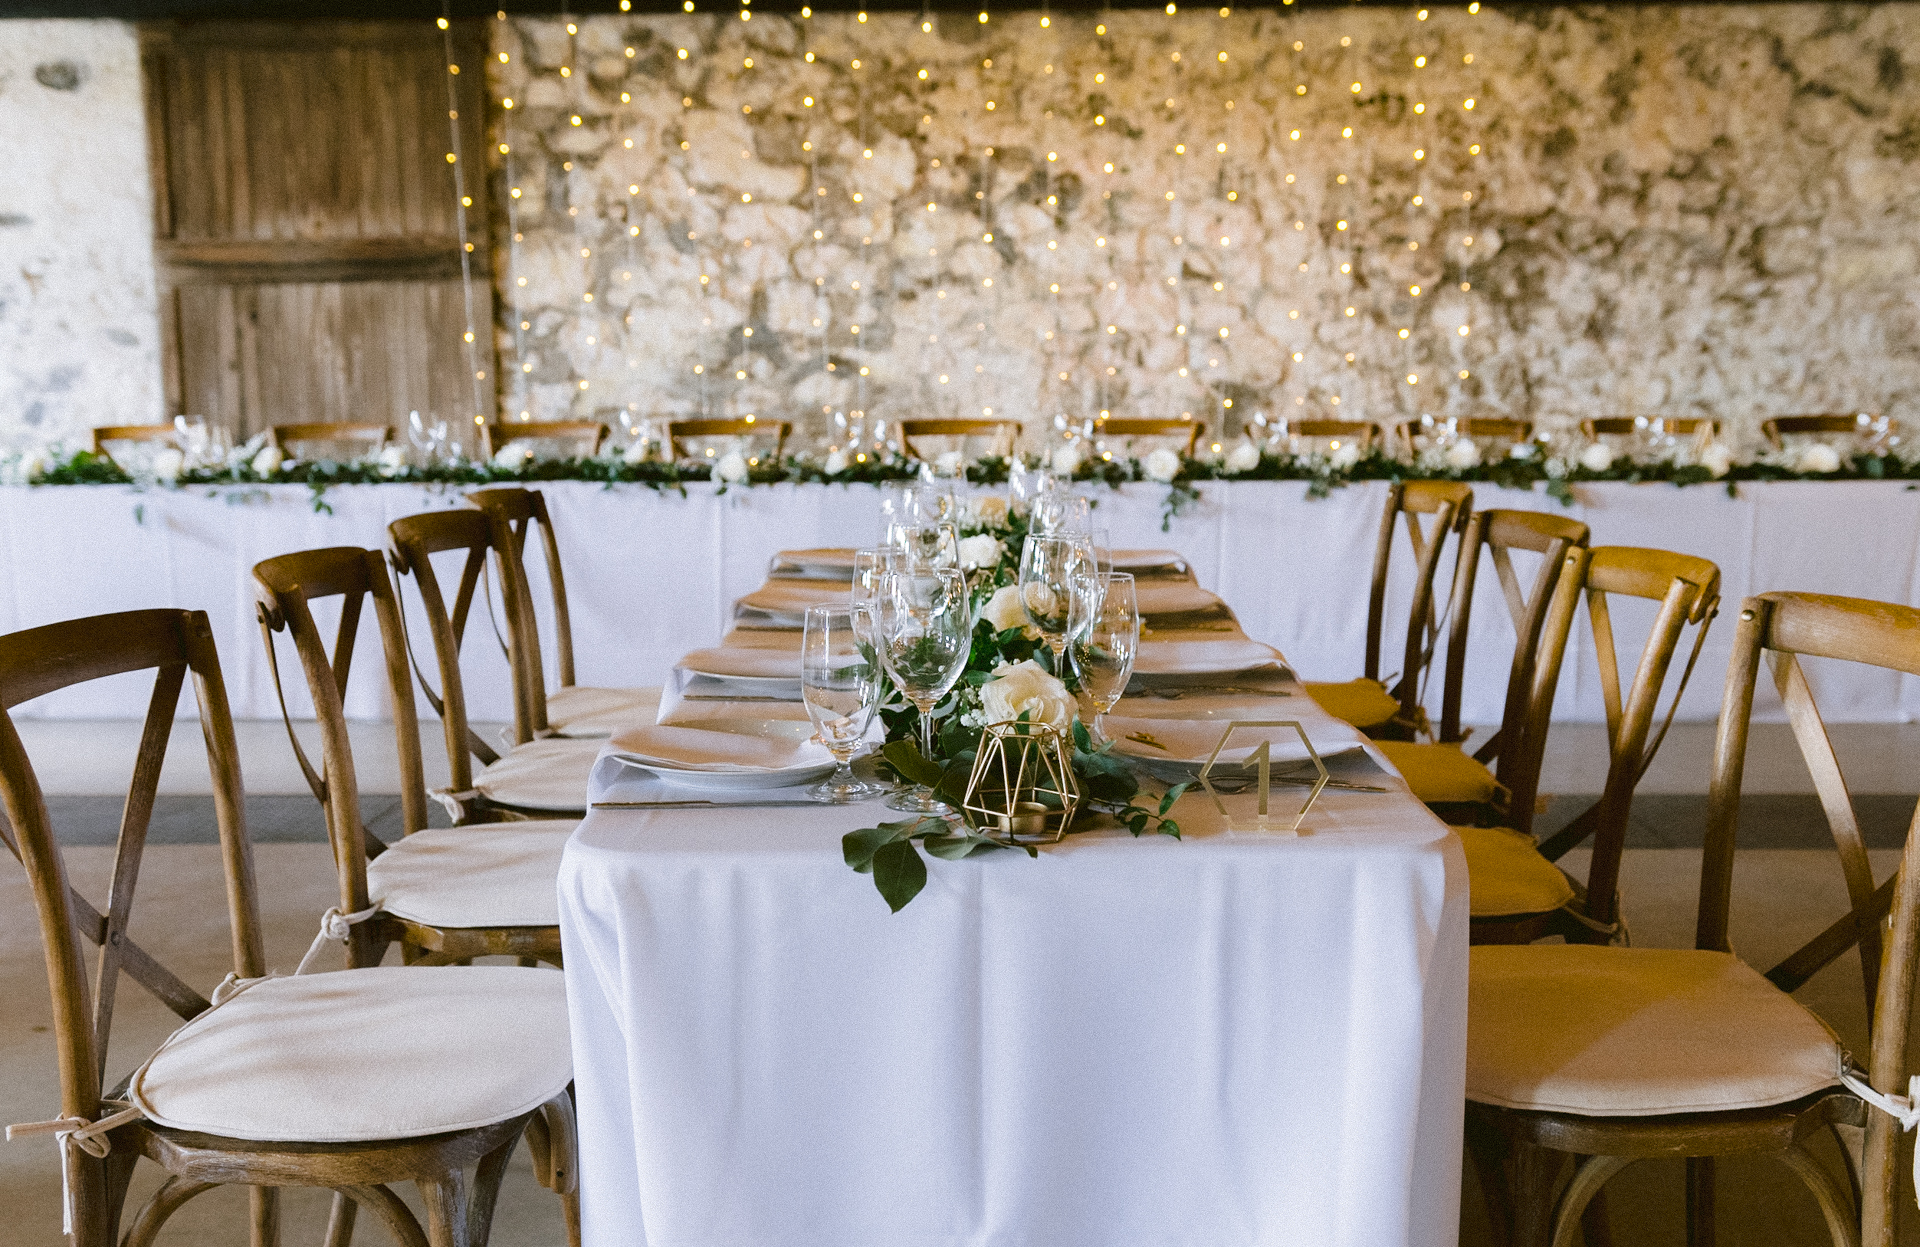 An elegantly set banquet table with floral centerpieces and string lights in a rustic venue